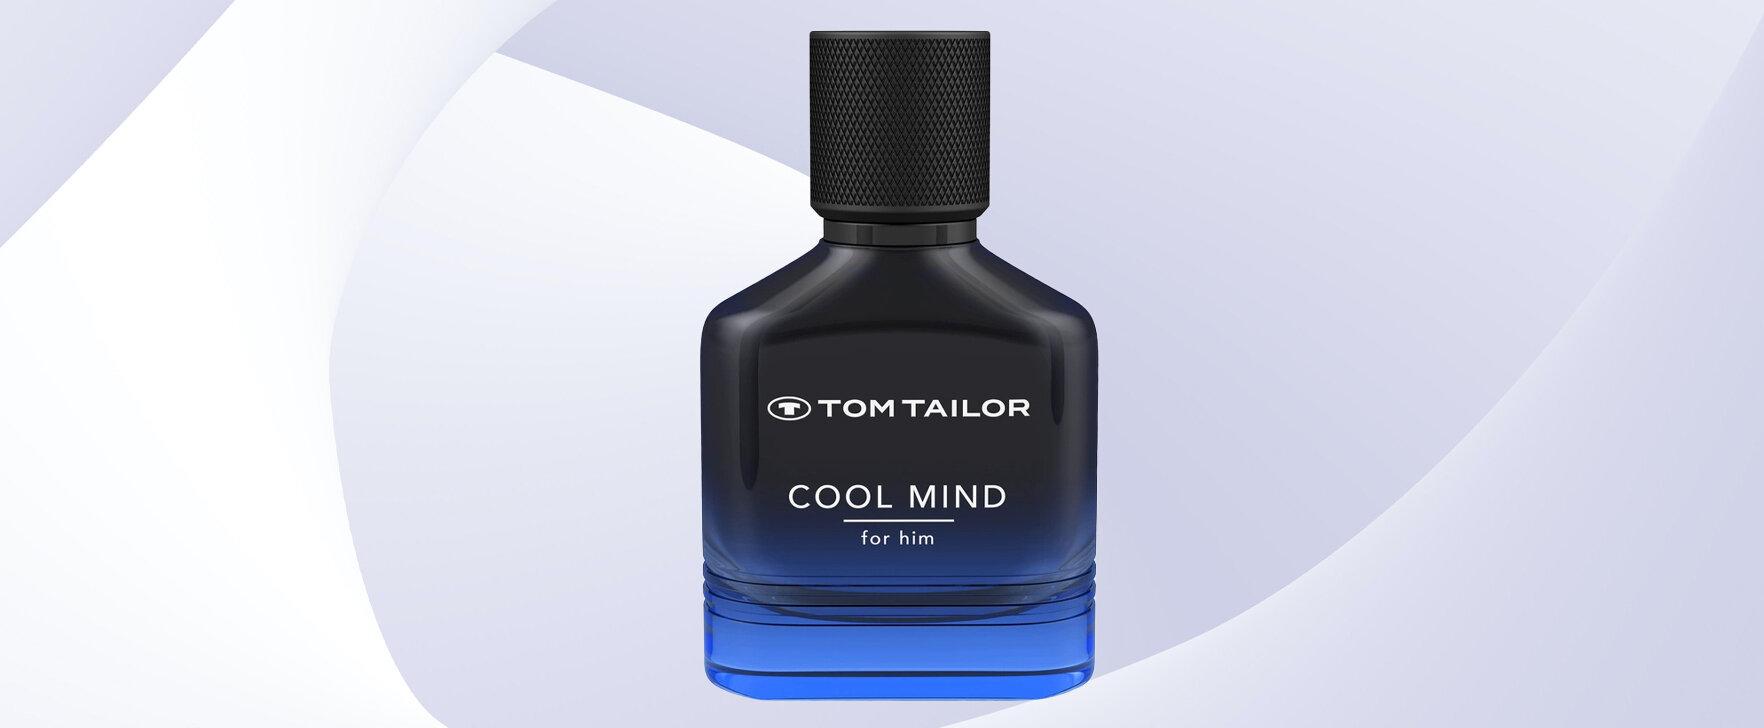 Cool Mind: The New Masculine Eau de Toilette From Tom Tailor